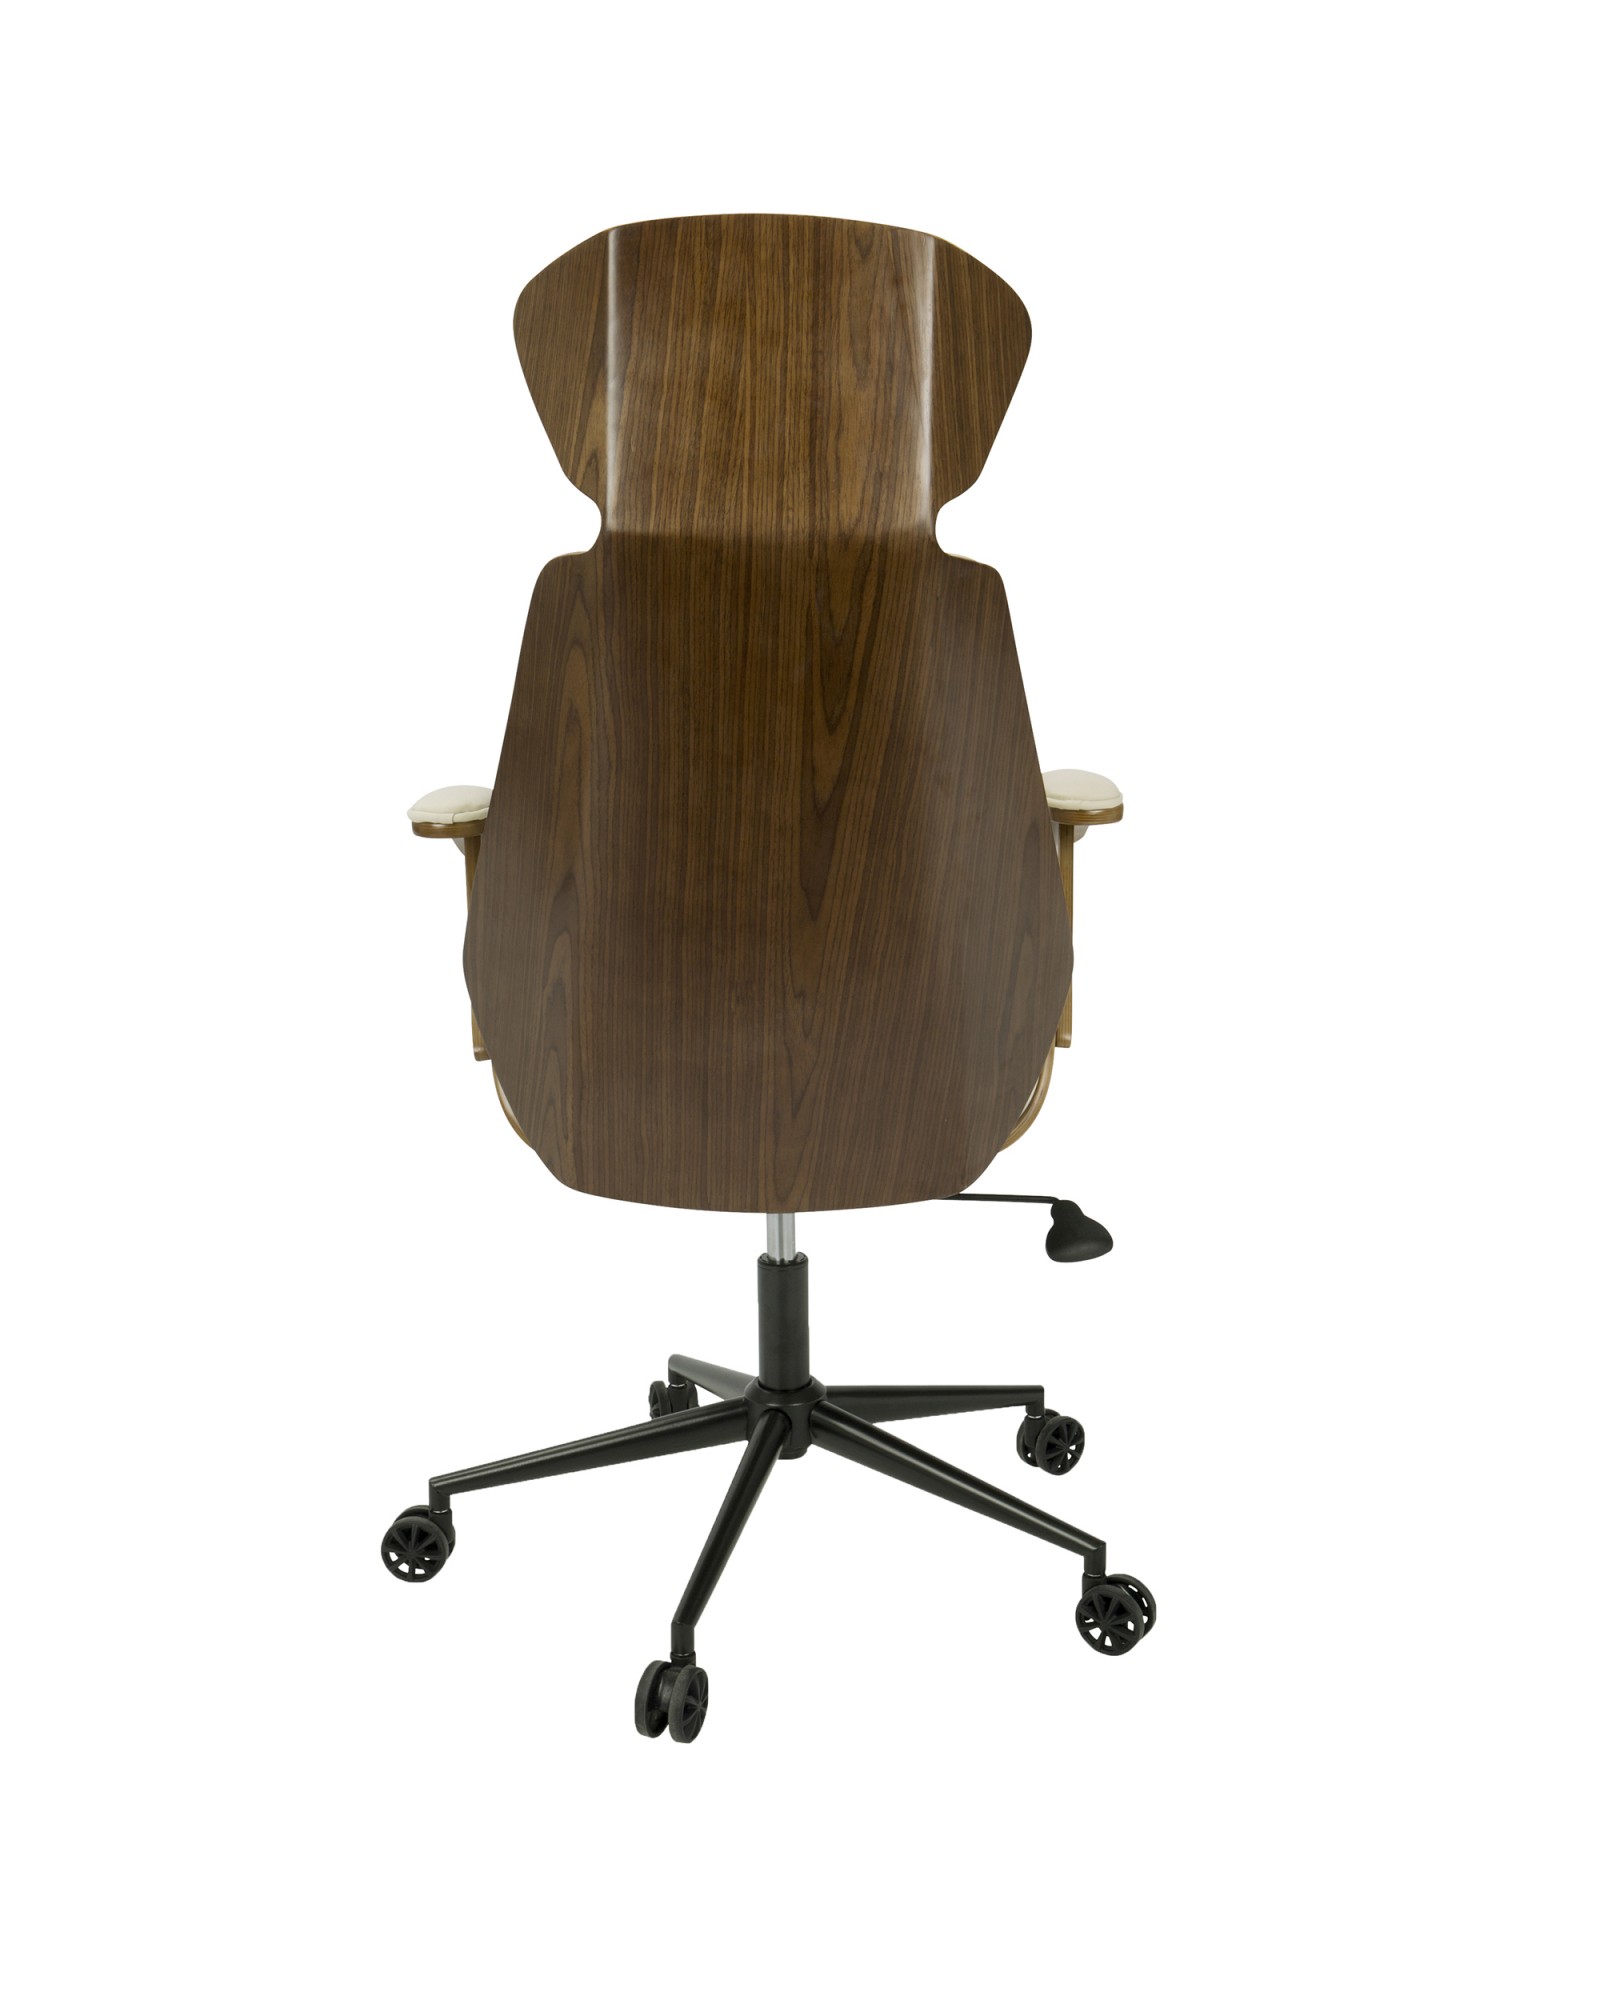 Spectre Mid-Century Modern Adjustable Office Chair in Walnut Wood and Cream Faux Leather